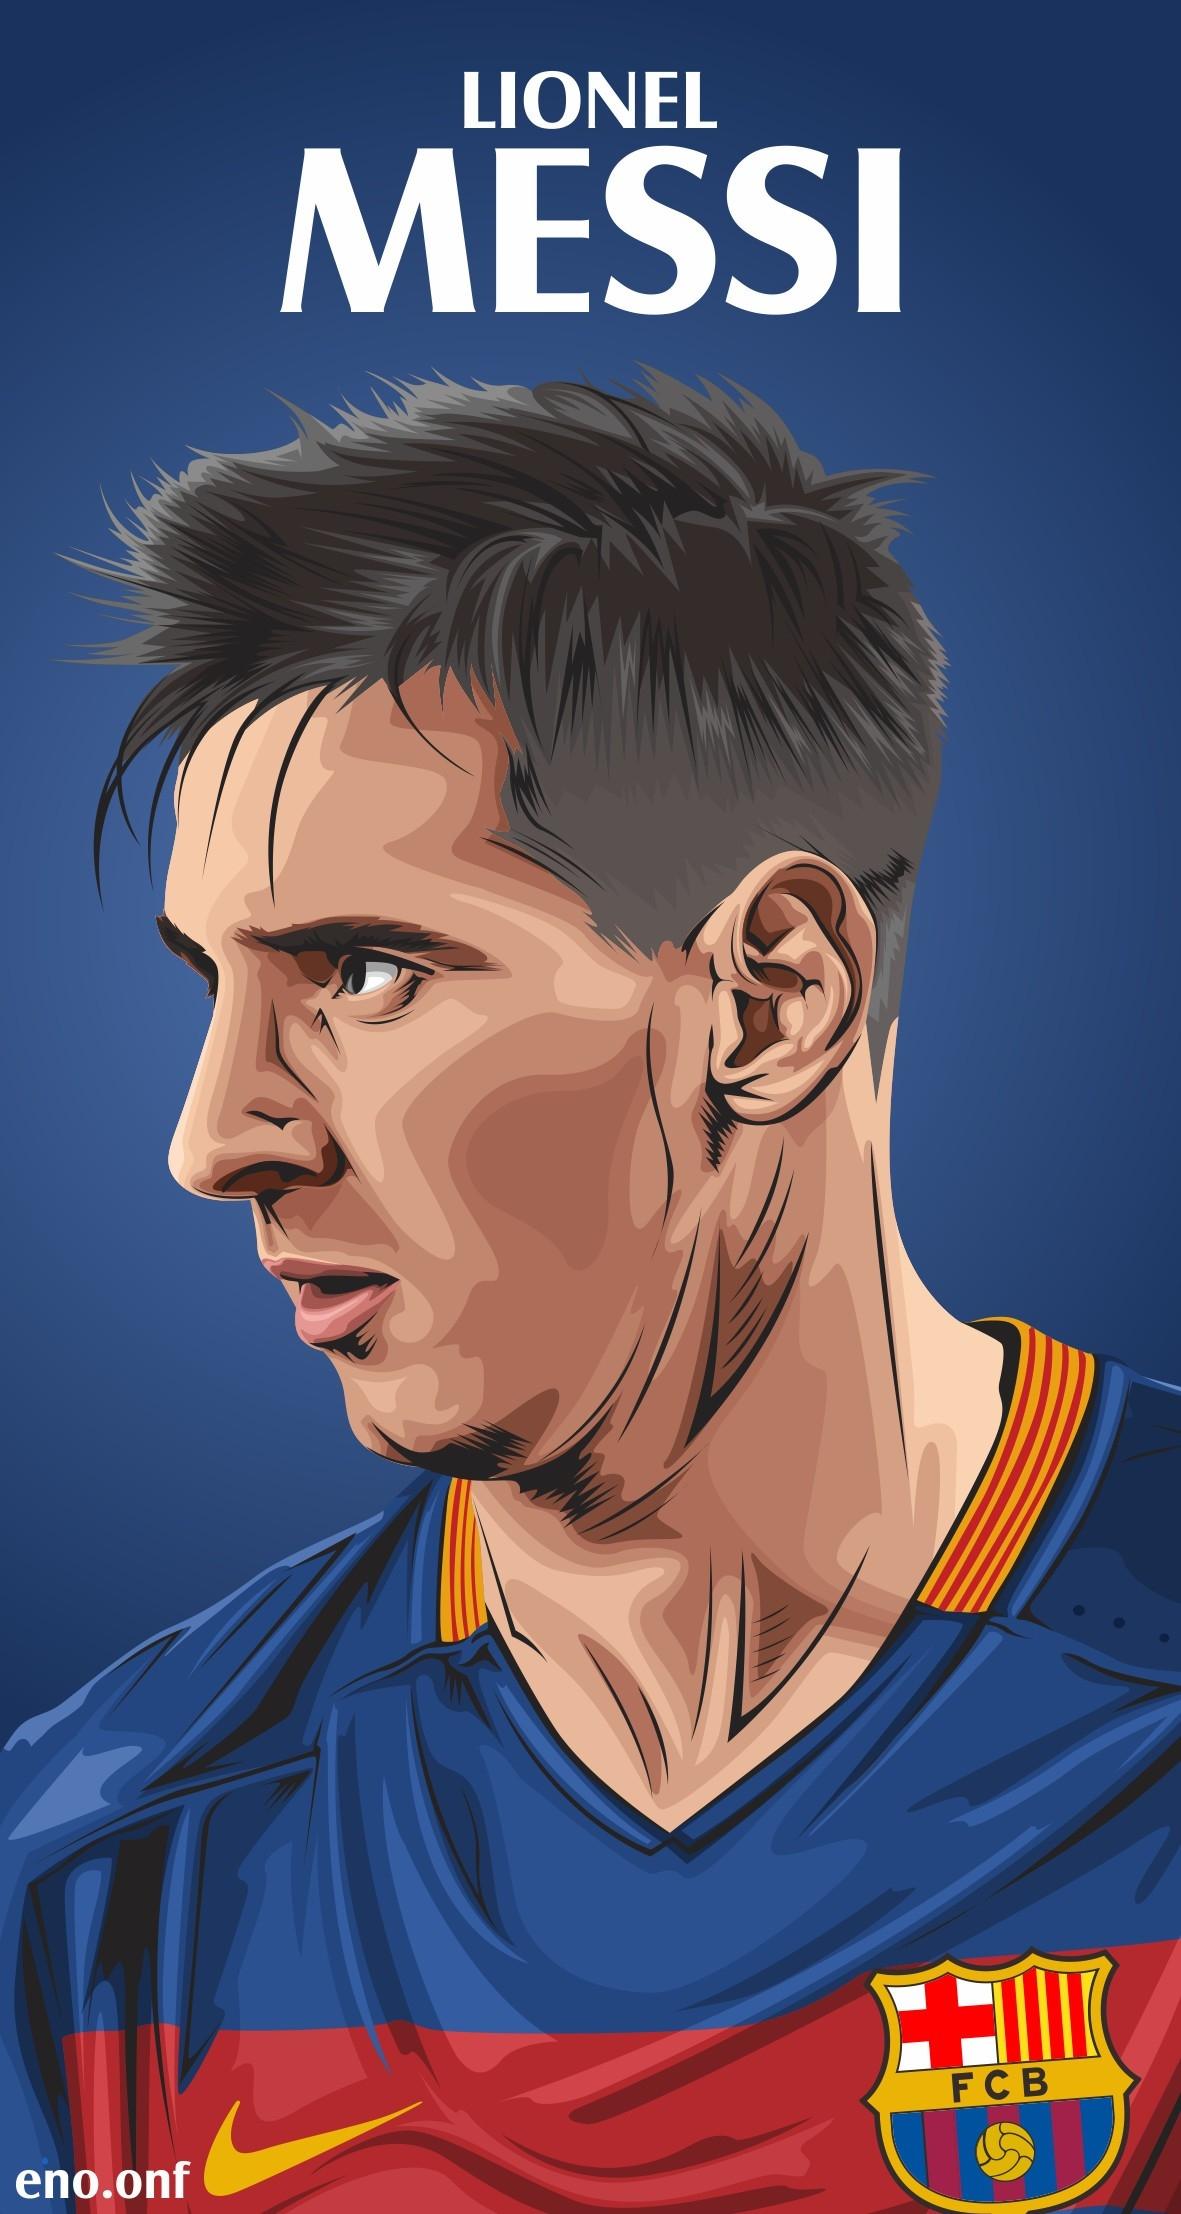 Lovely Messi Hd Wallpapers For Iphone 6 2016 - Lionel Messi Wallpaper 2018 For Iphone , HD Wallpaper & Backgrounds